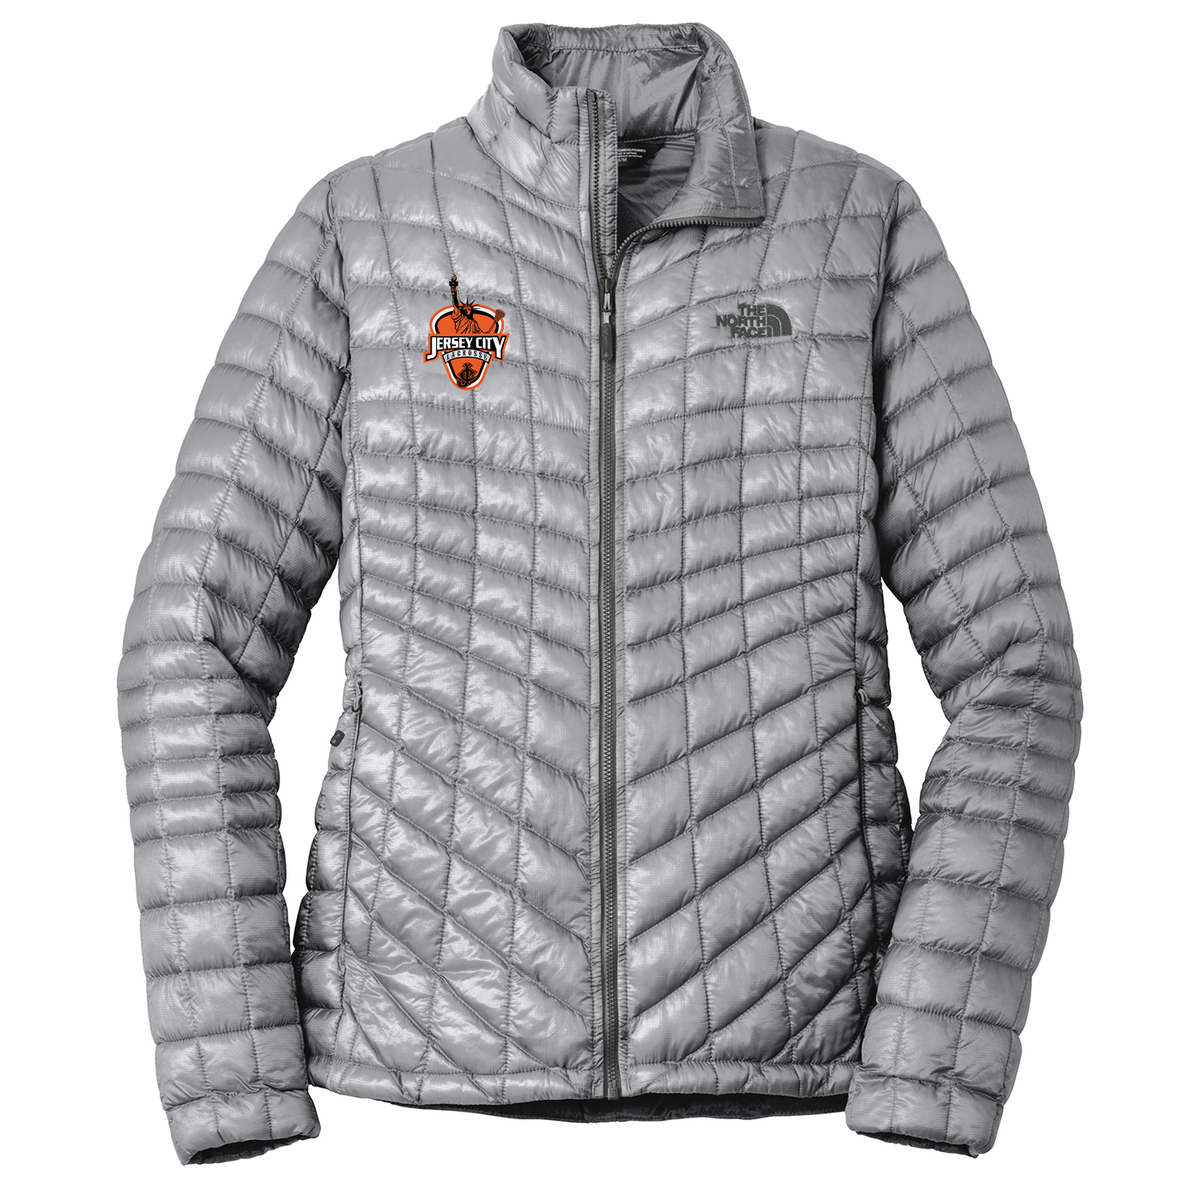 Jersey City Lacrosse The North Face Ladies ThermoBall Jacket